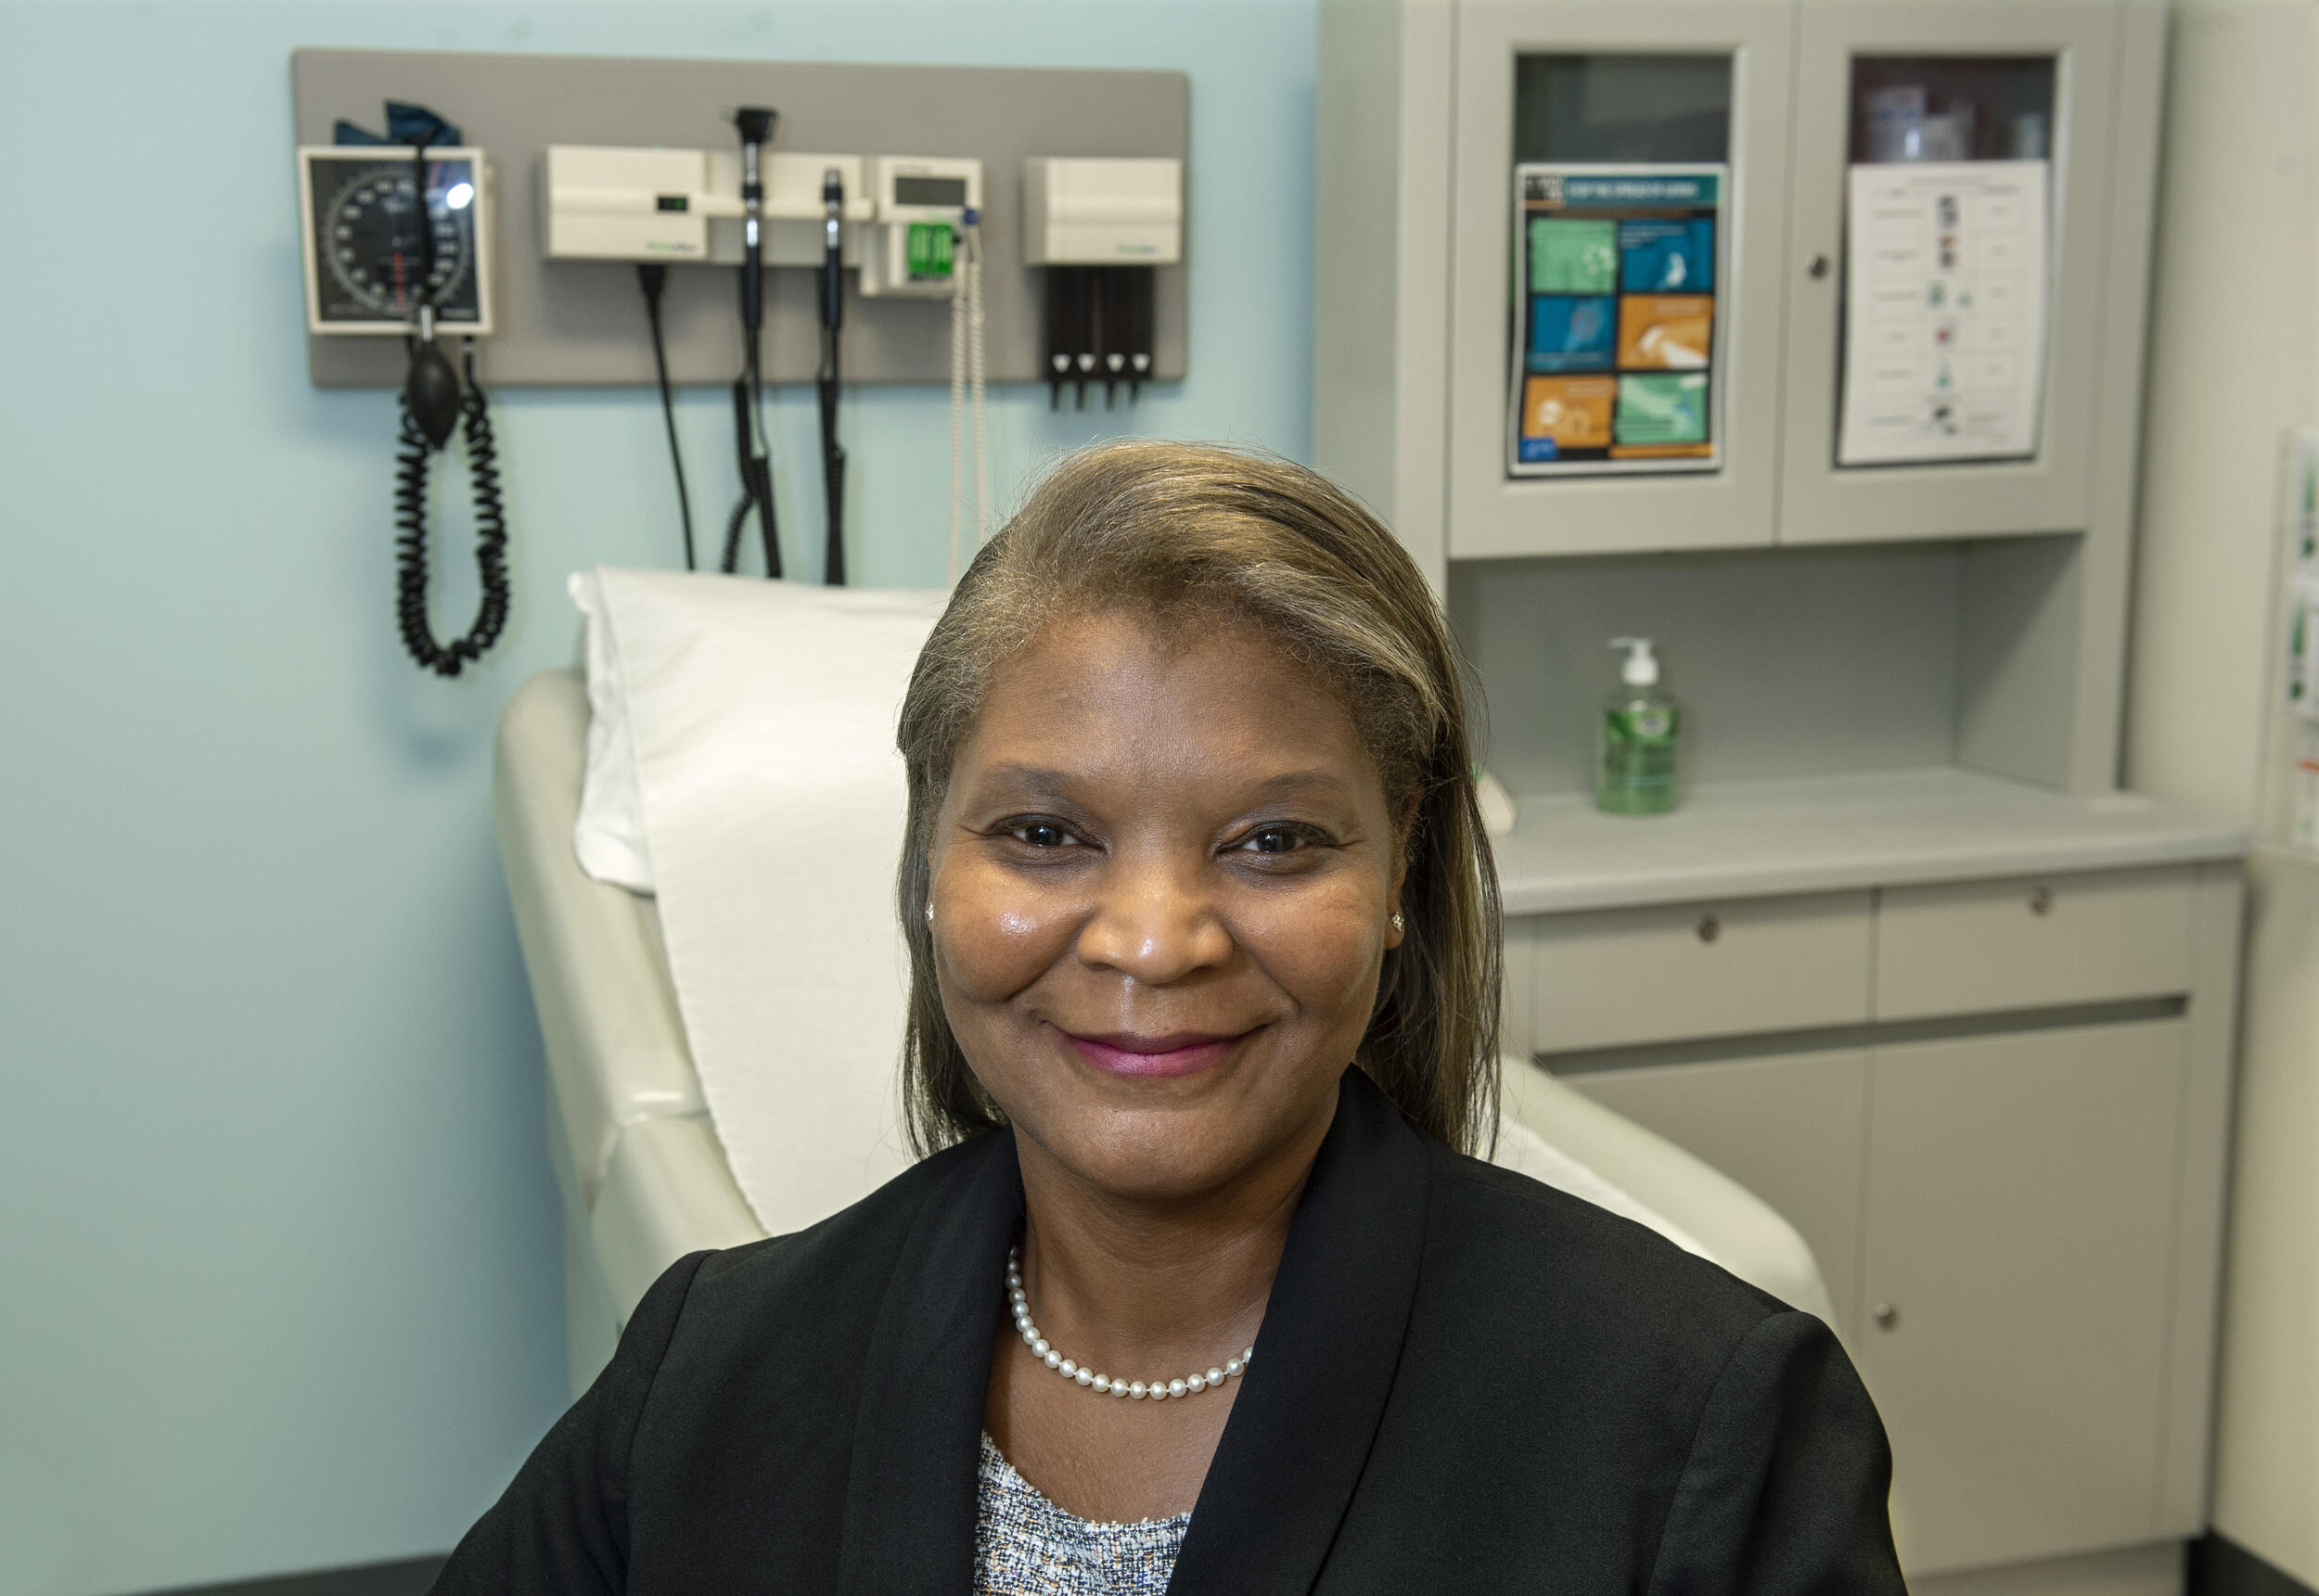 A woman wearing a sport coat smiling in an exam room 